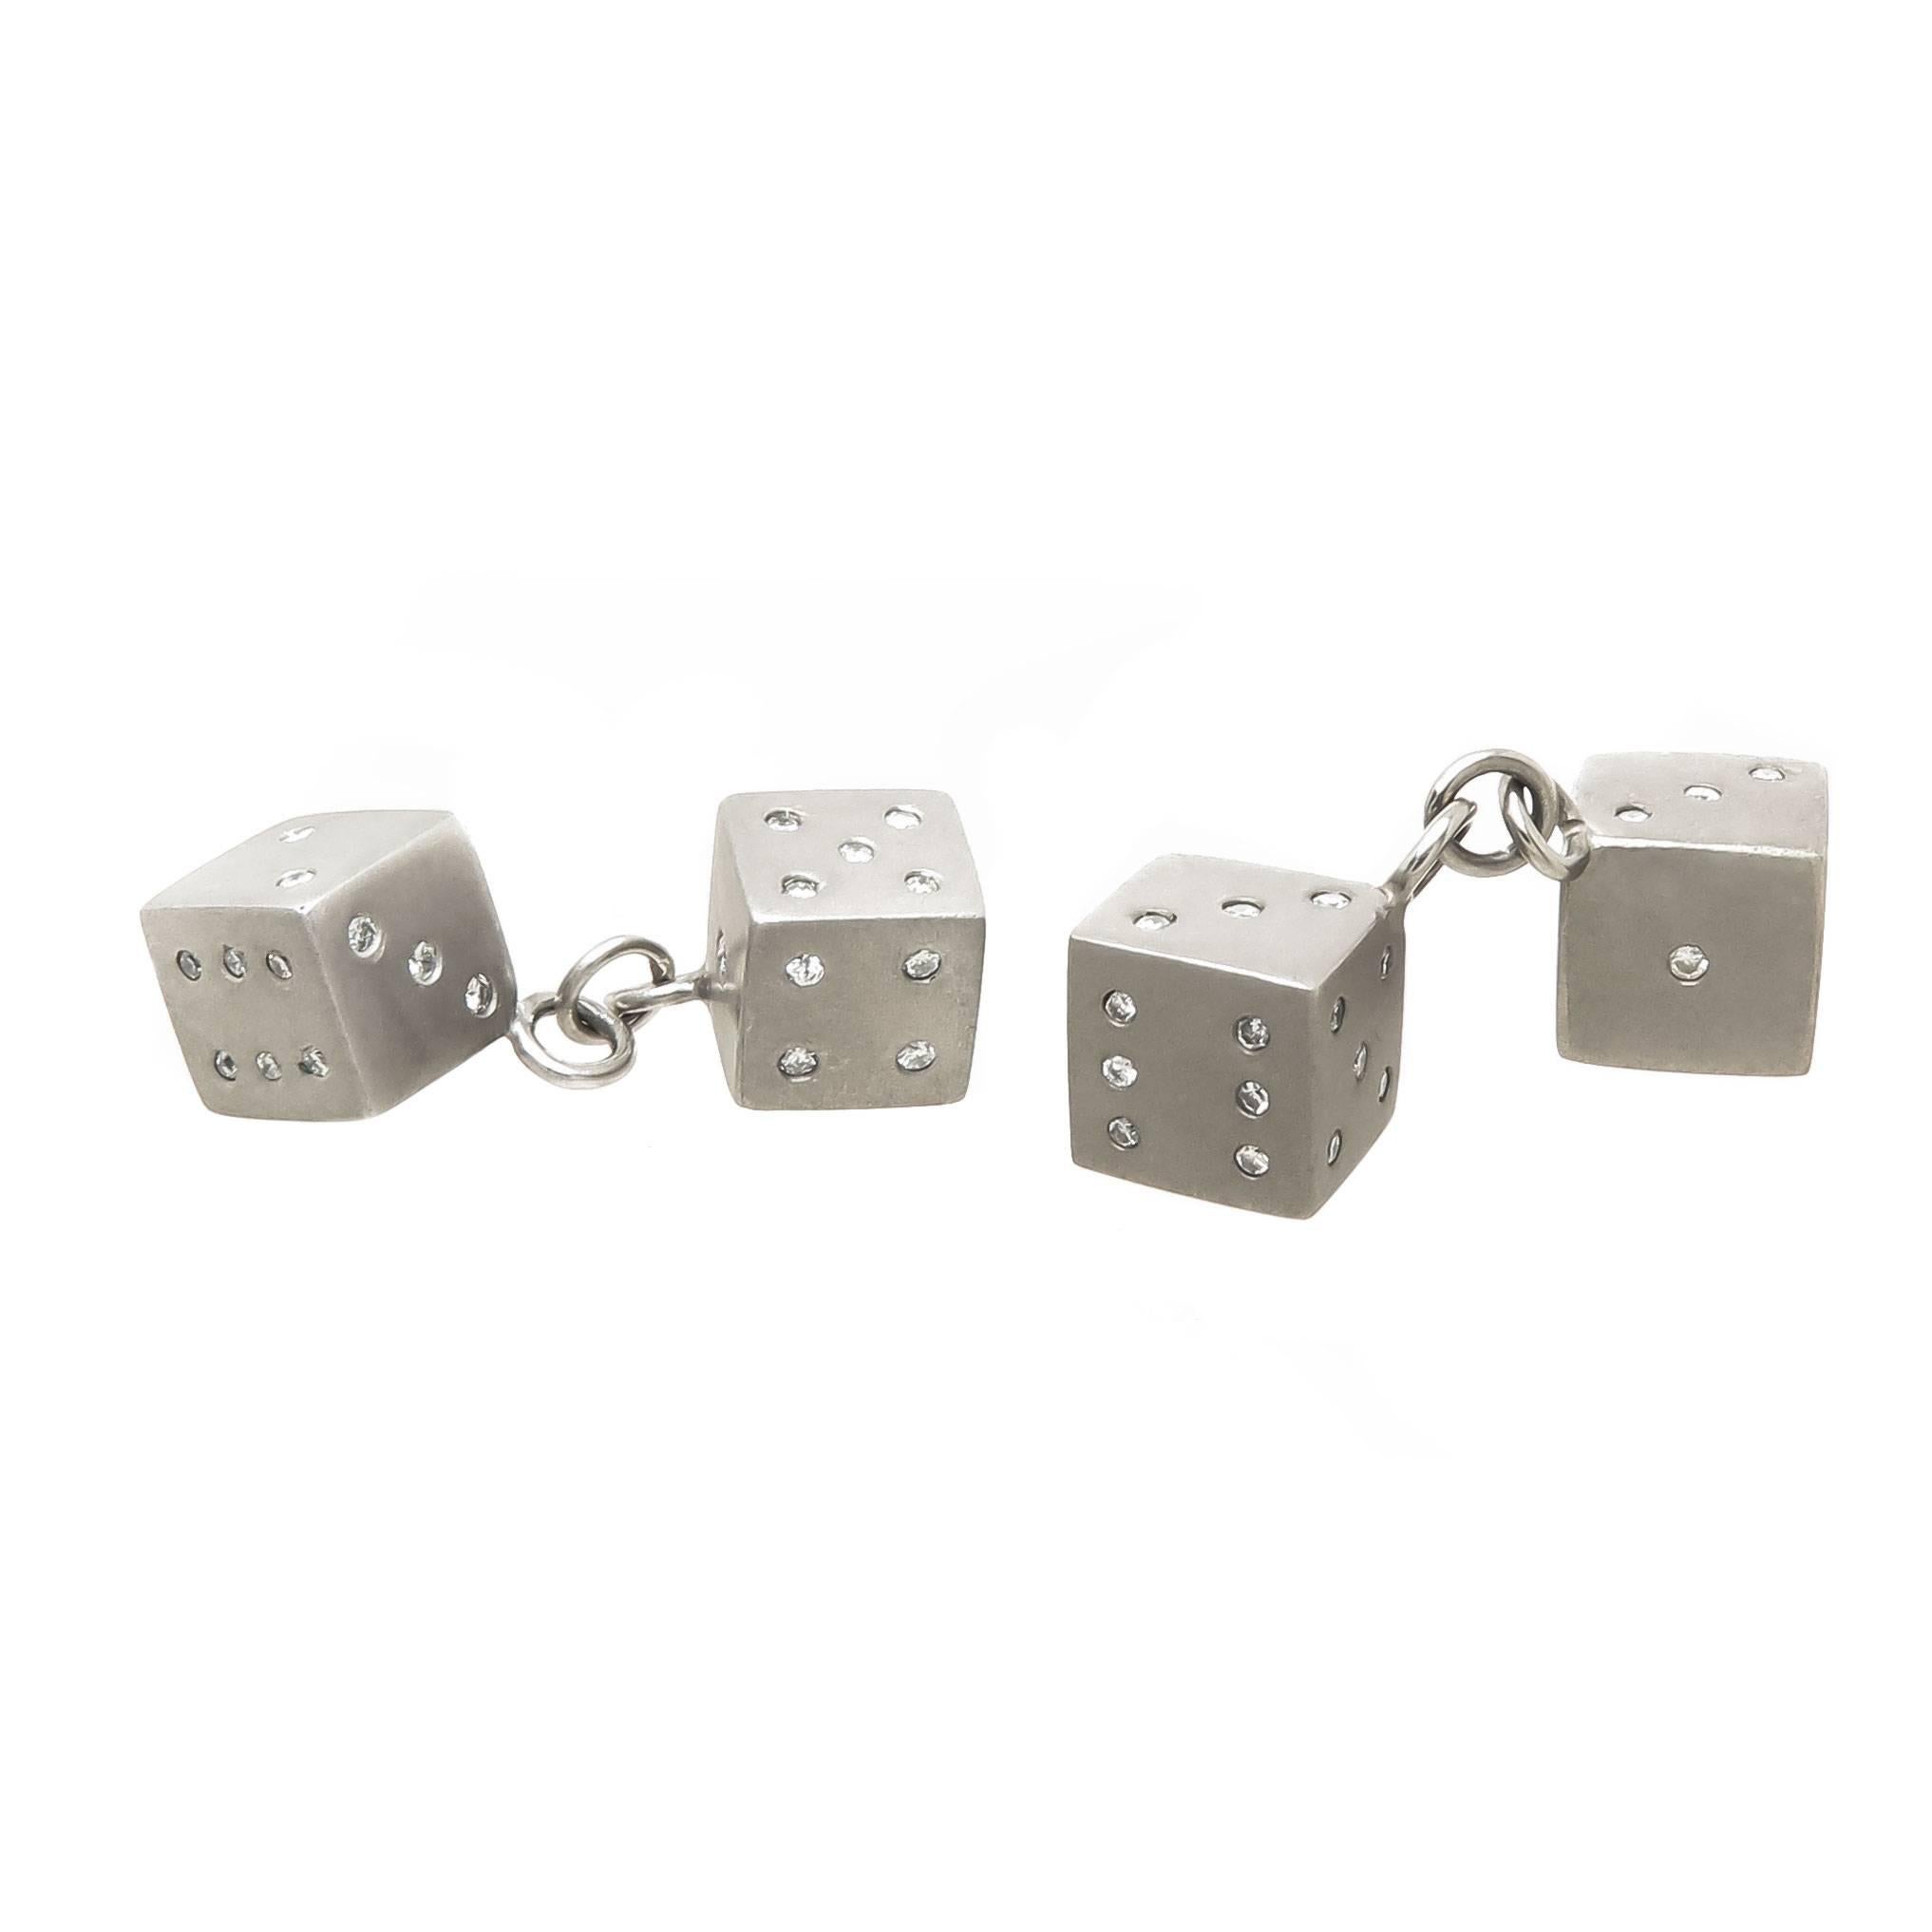 Circa 1970s Platinum Dice Cufflinks, set with Round Brilliant cut Diamonds totaling .85 Ct, each Dice measures 3/8 X 3/8 inch square and the pair weigh a total of 20.5 Grams.